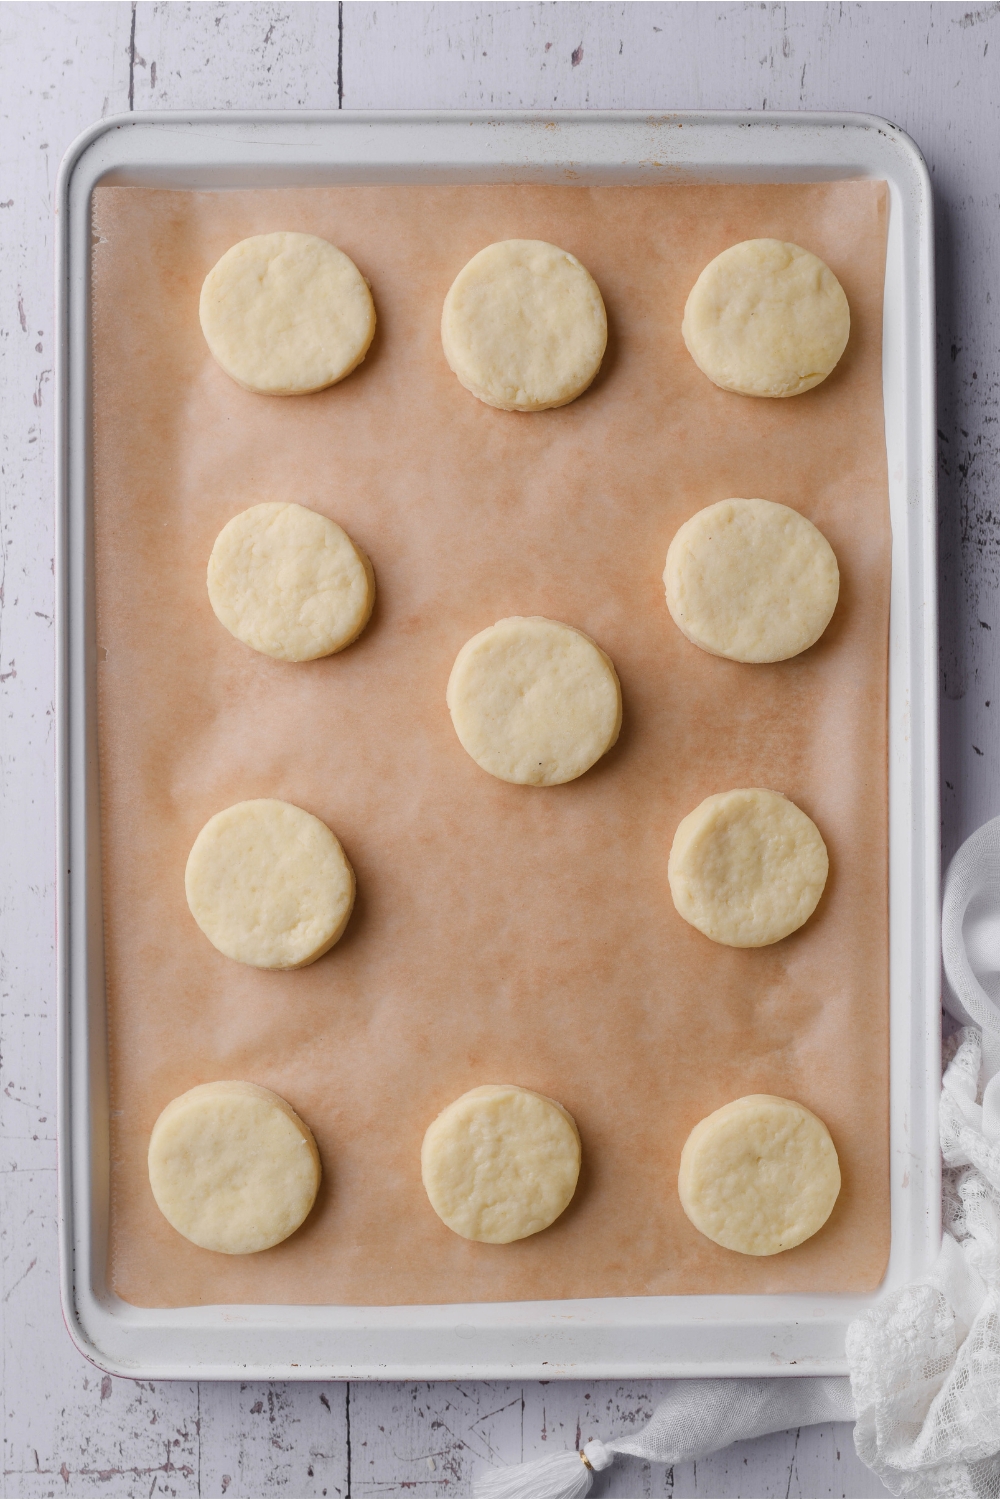 Circles of unbaked biscuit dough on a baking sheet lined with parchment paper.